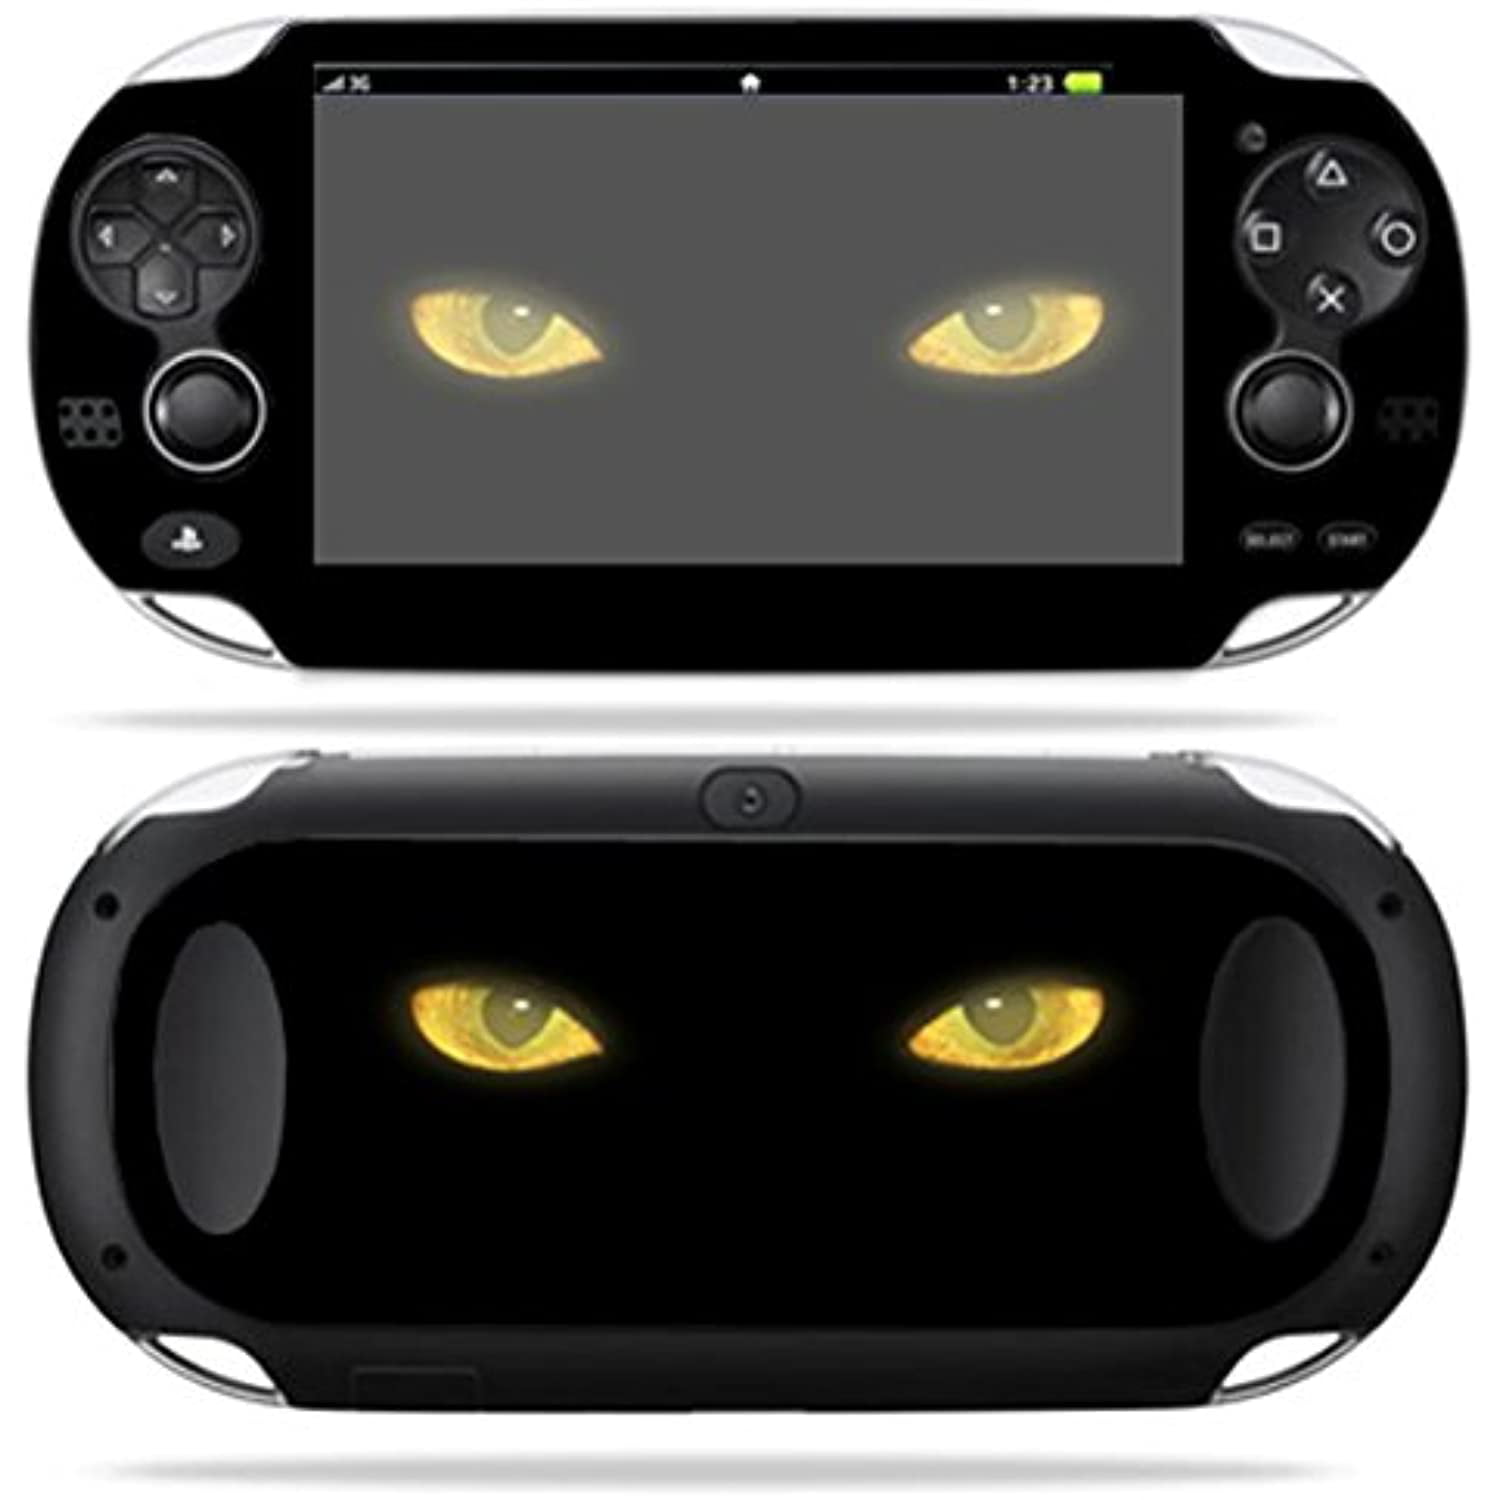 MightySkins Skin Compatible with Sony PS Vita wrap Cover Sticker Skins Retro Gamer 1 